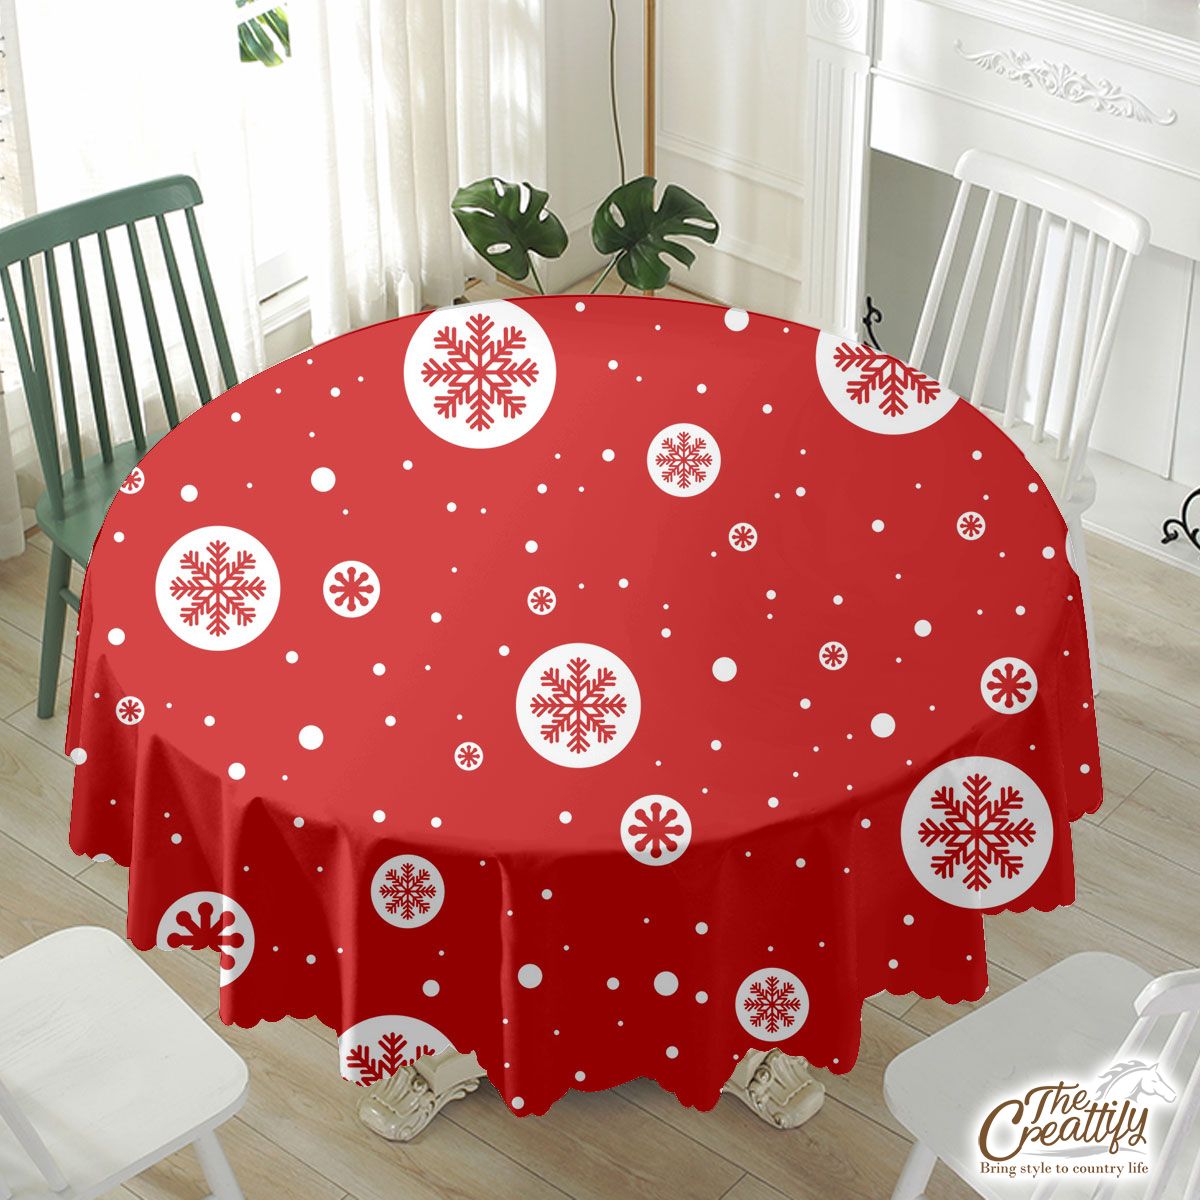 Snowflake Clipart On The Red Background Waterproof Tablecloth